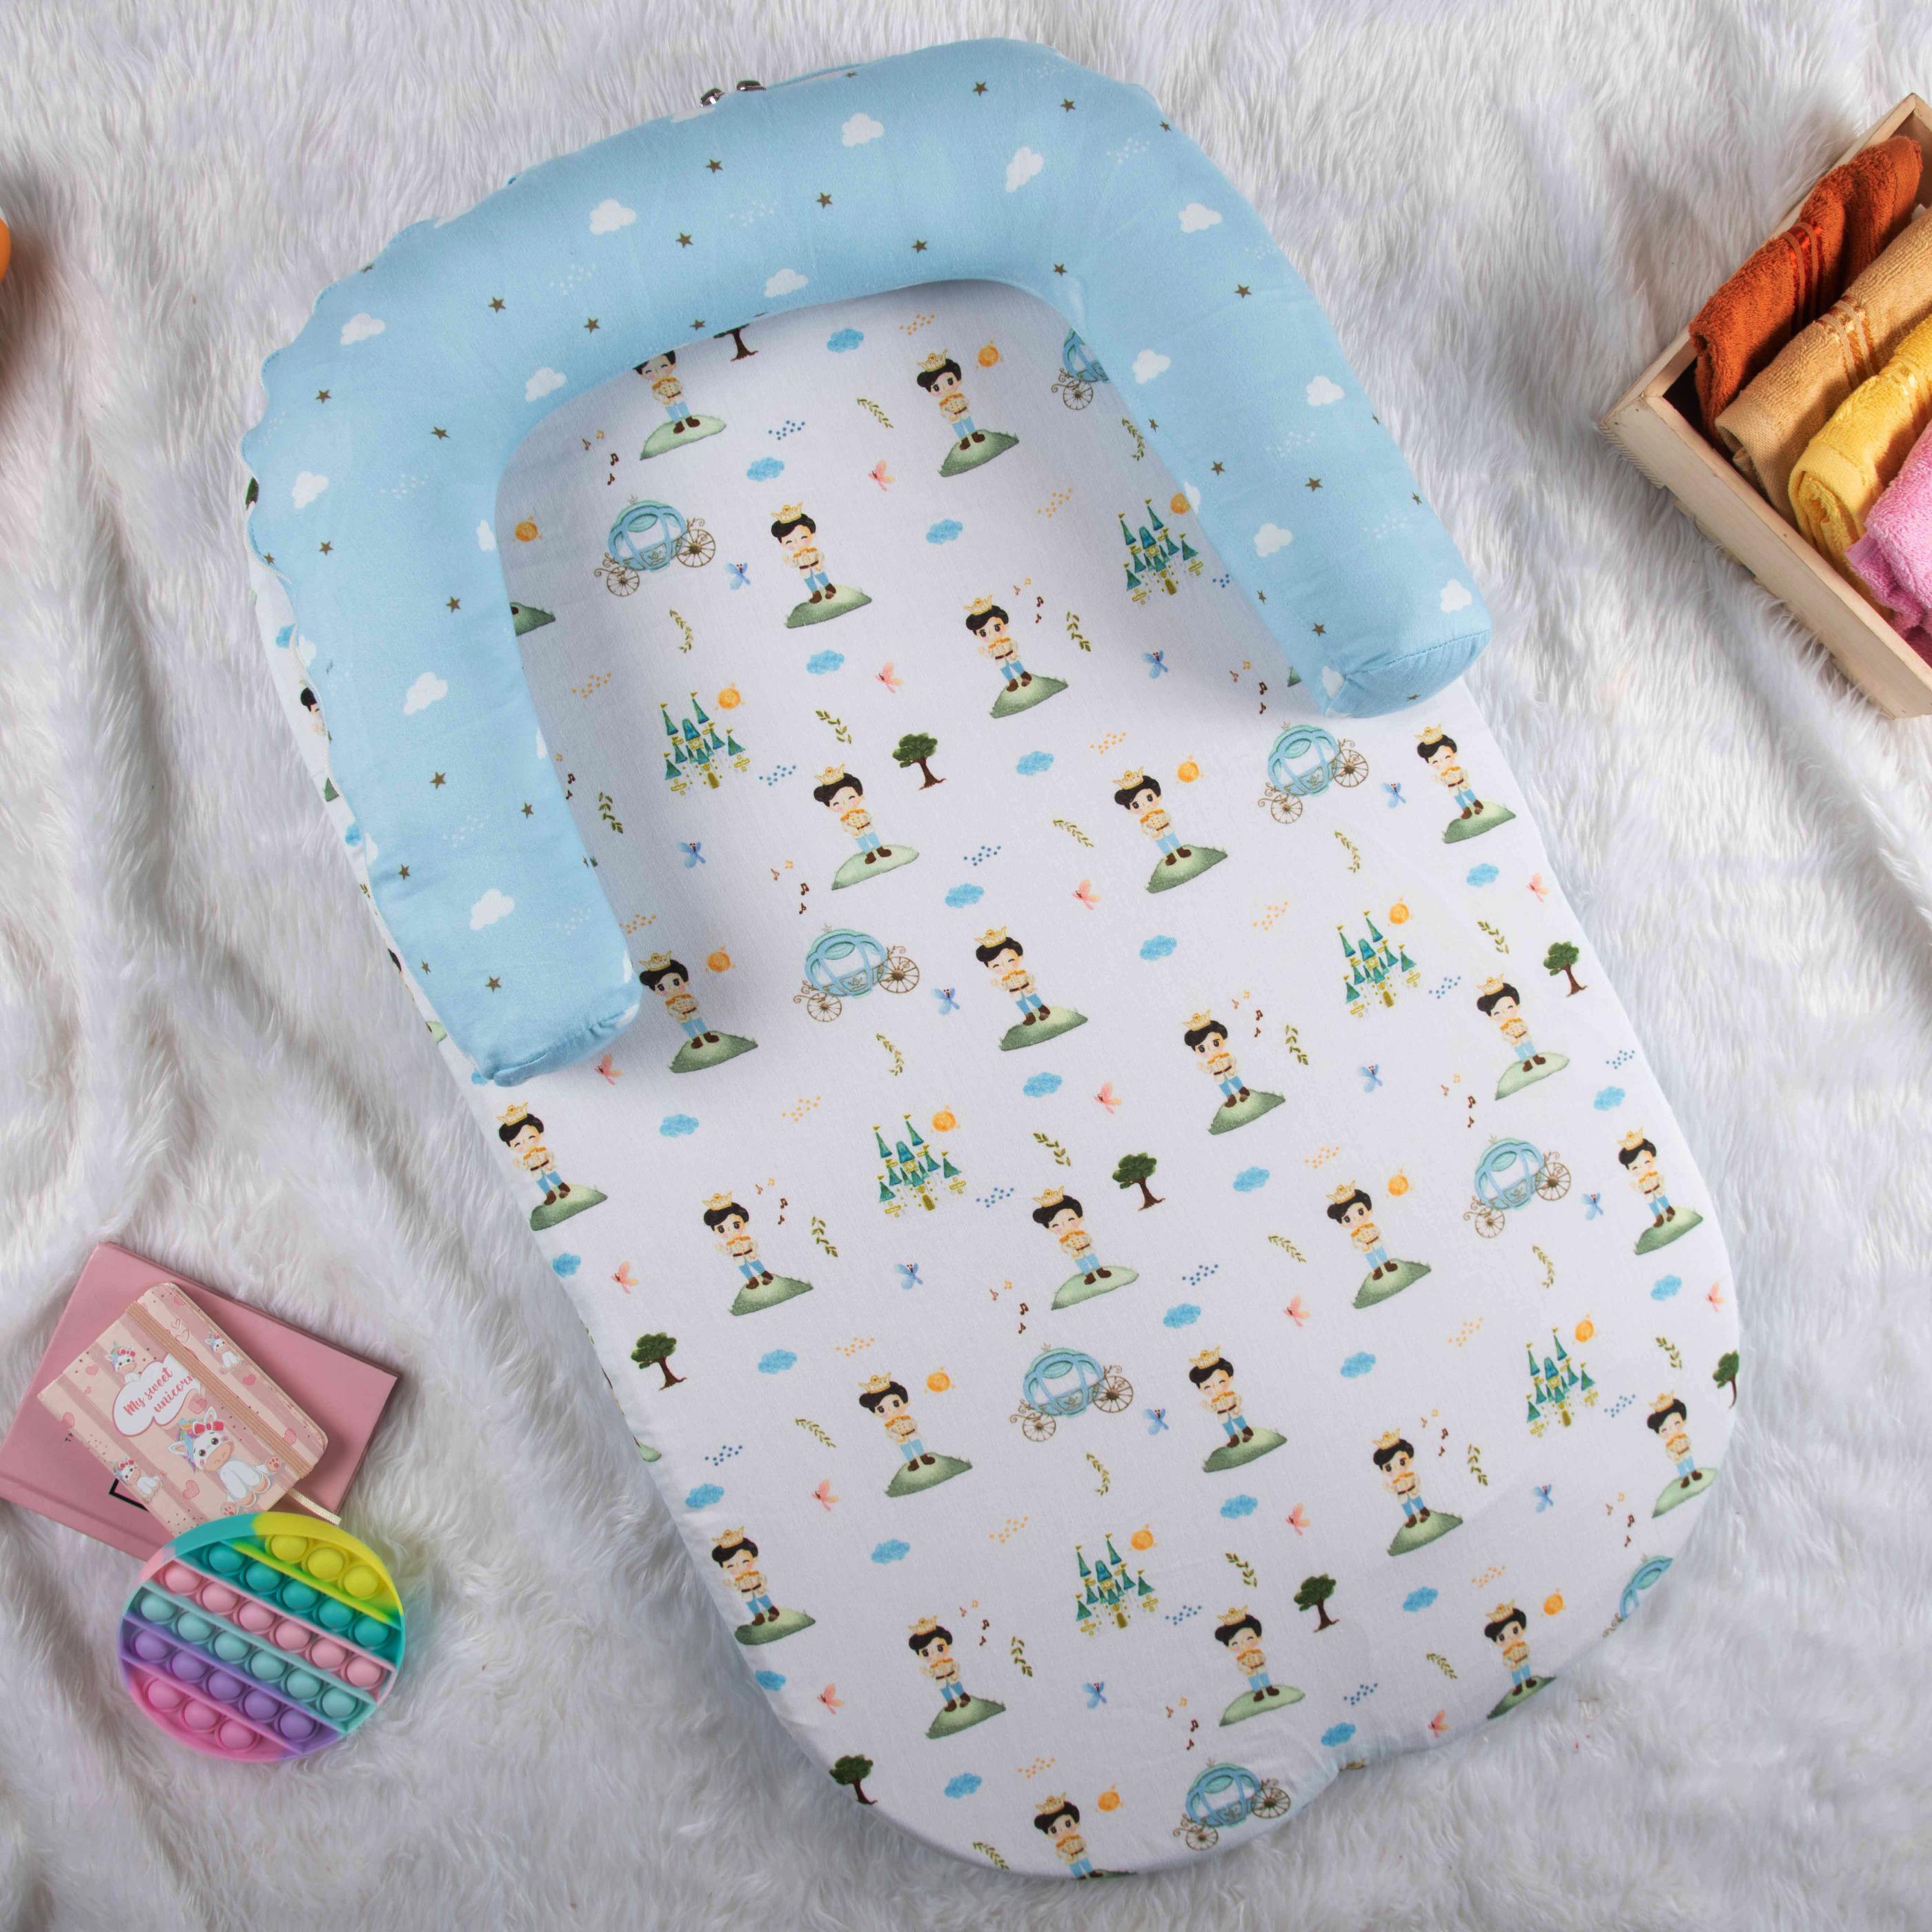 Tiny Snooze Foldable Baby Bed- The Little Prince